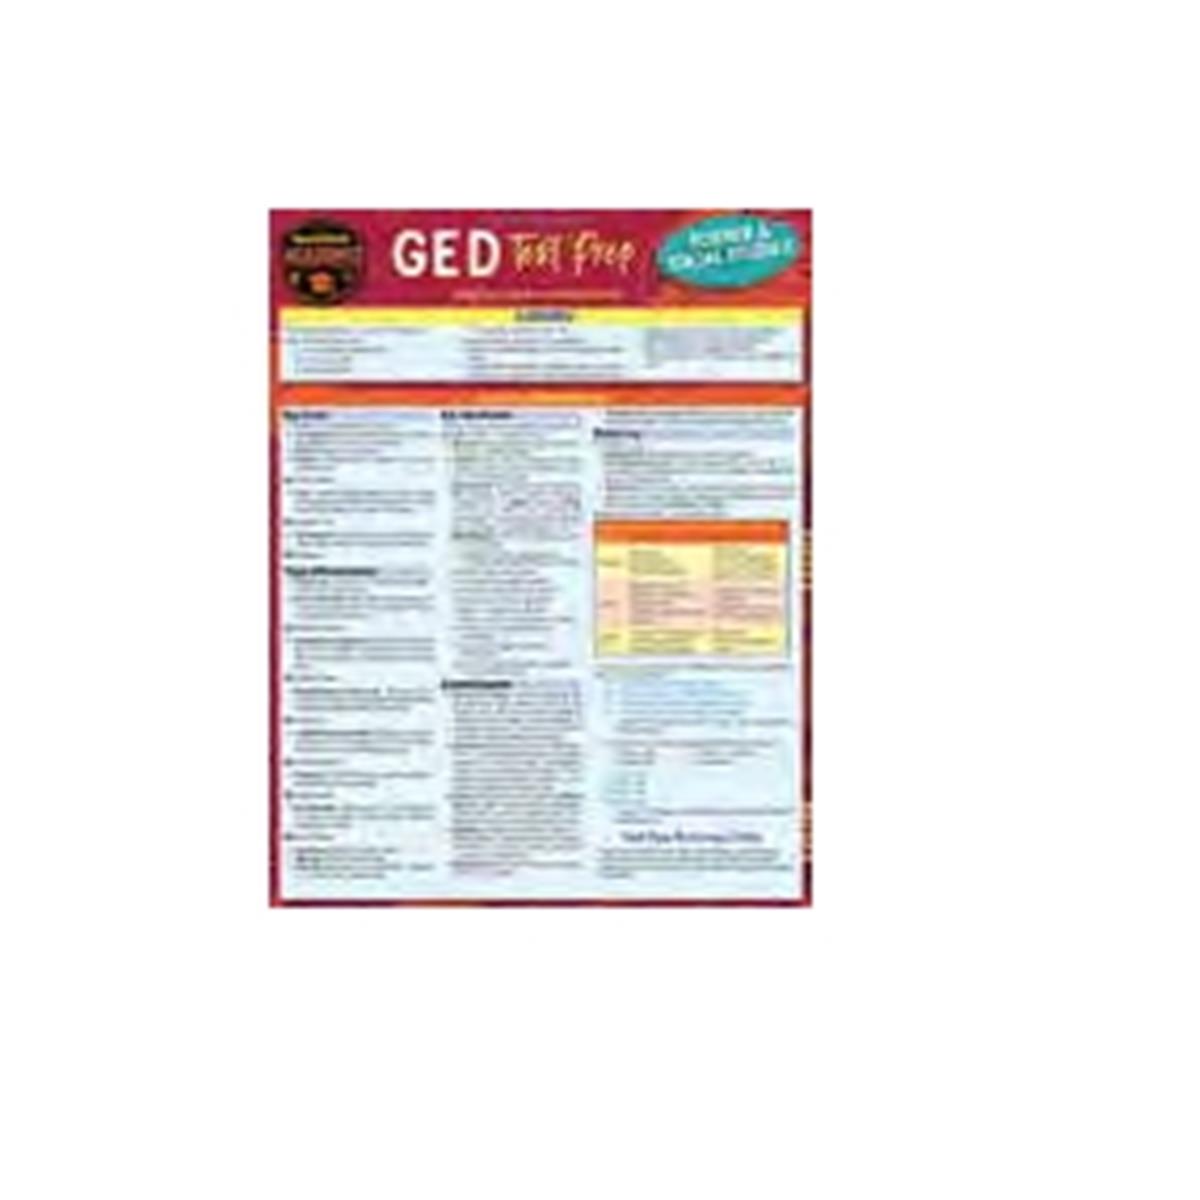 9781423240365 GED Test Prep - Science & Social Studies Guide -  BarCharts